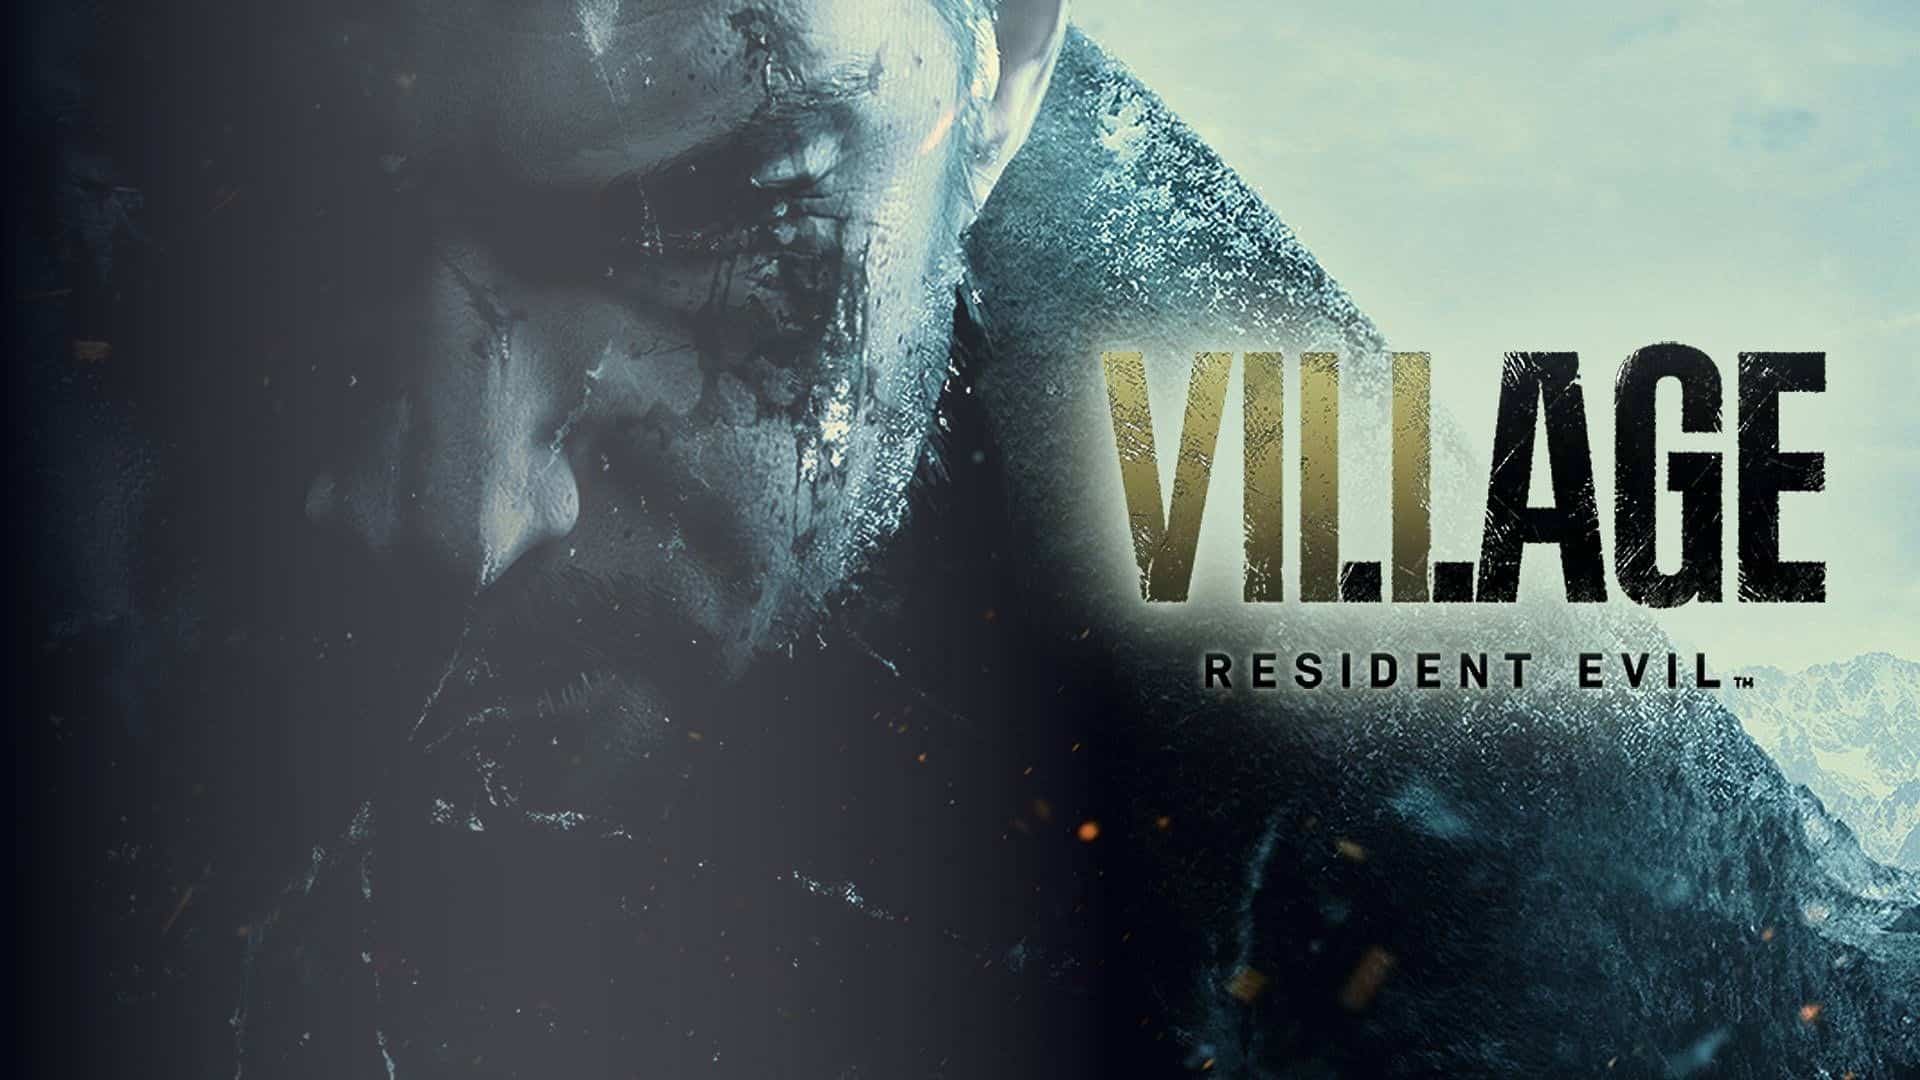 Resident Evil Village: release date, story, gameplay & more